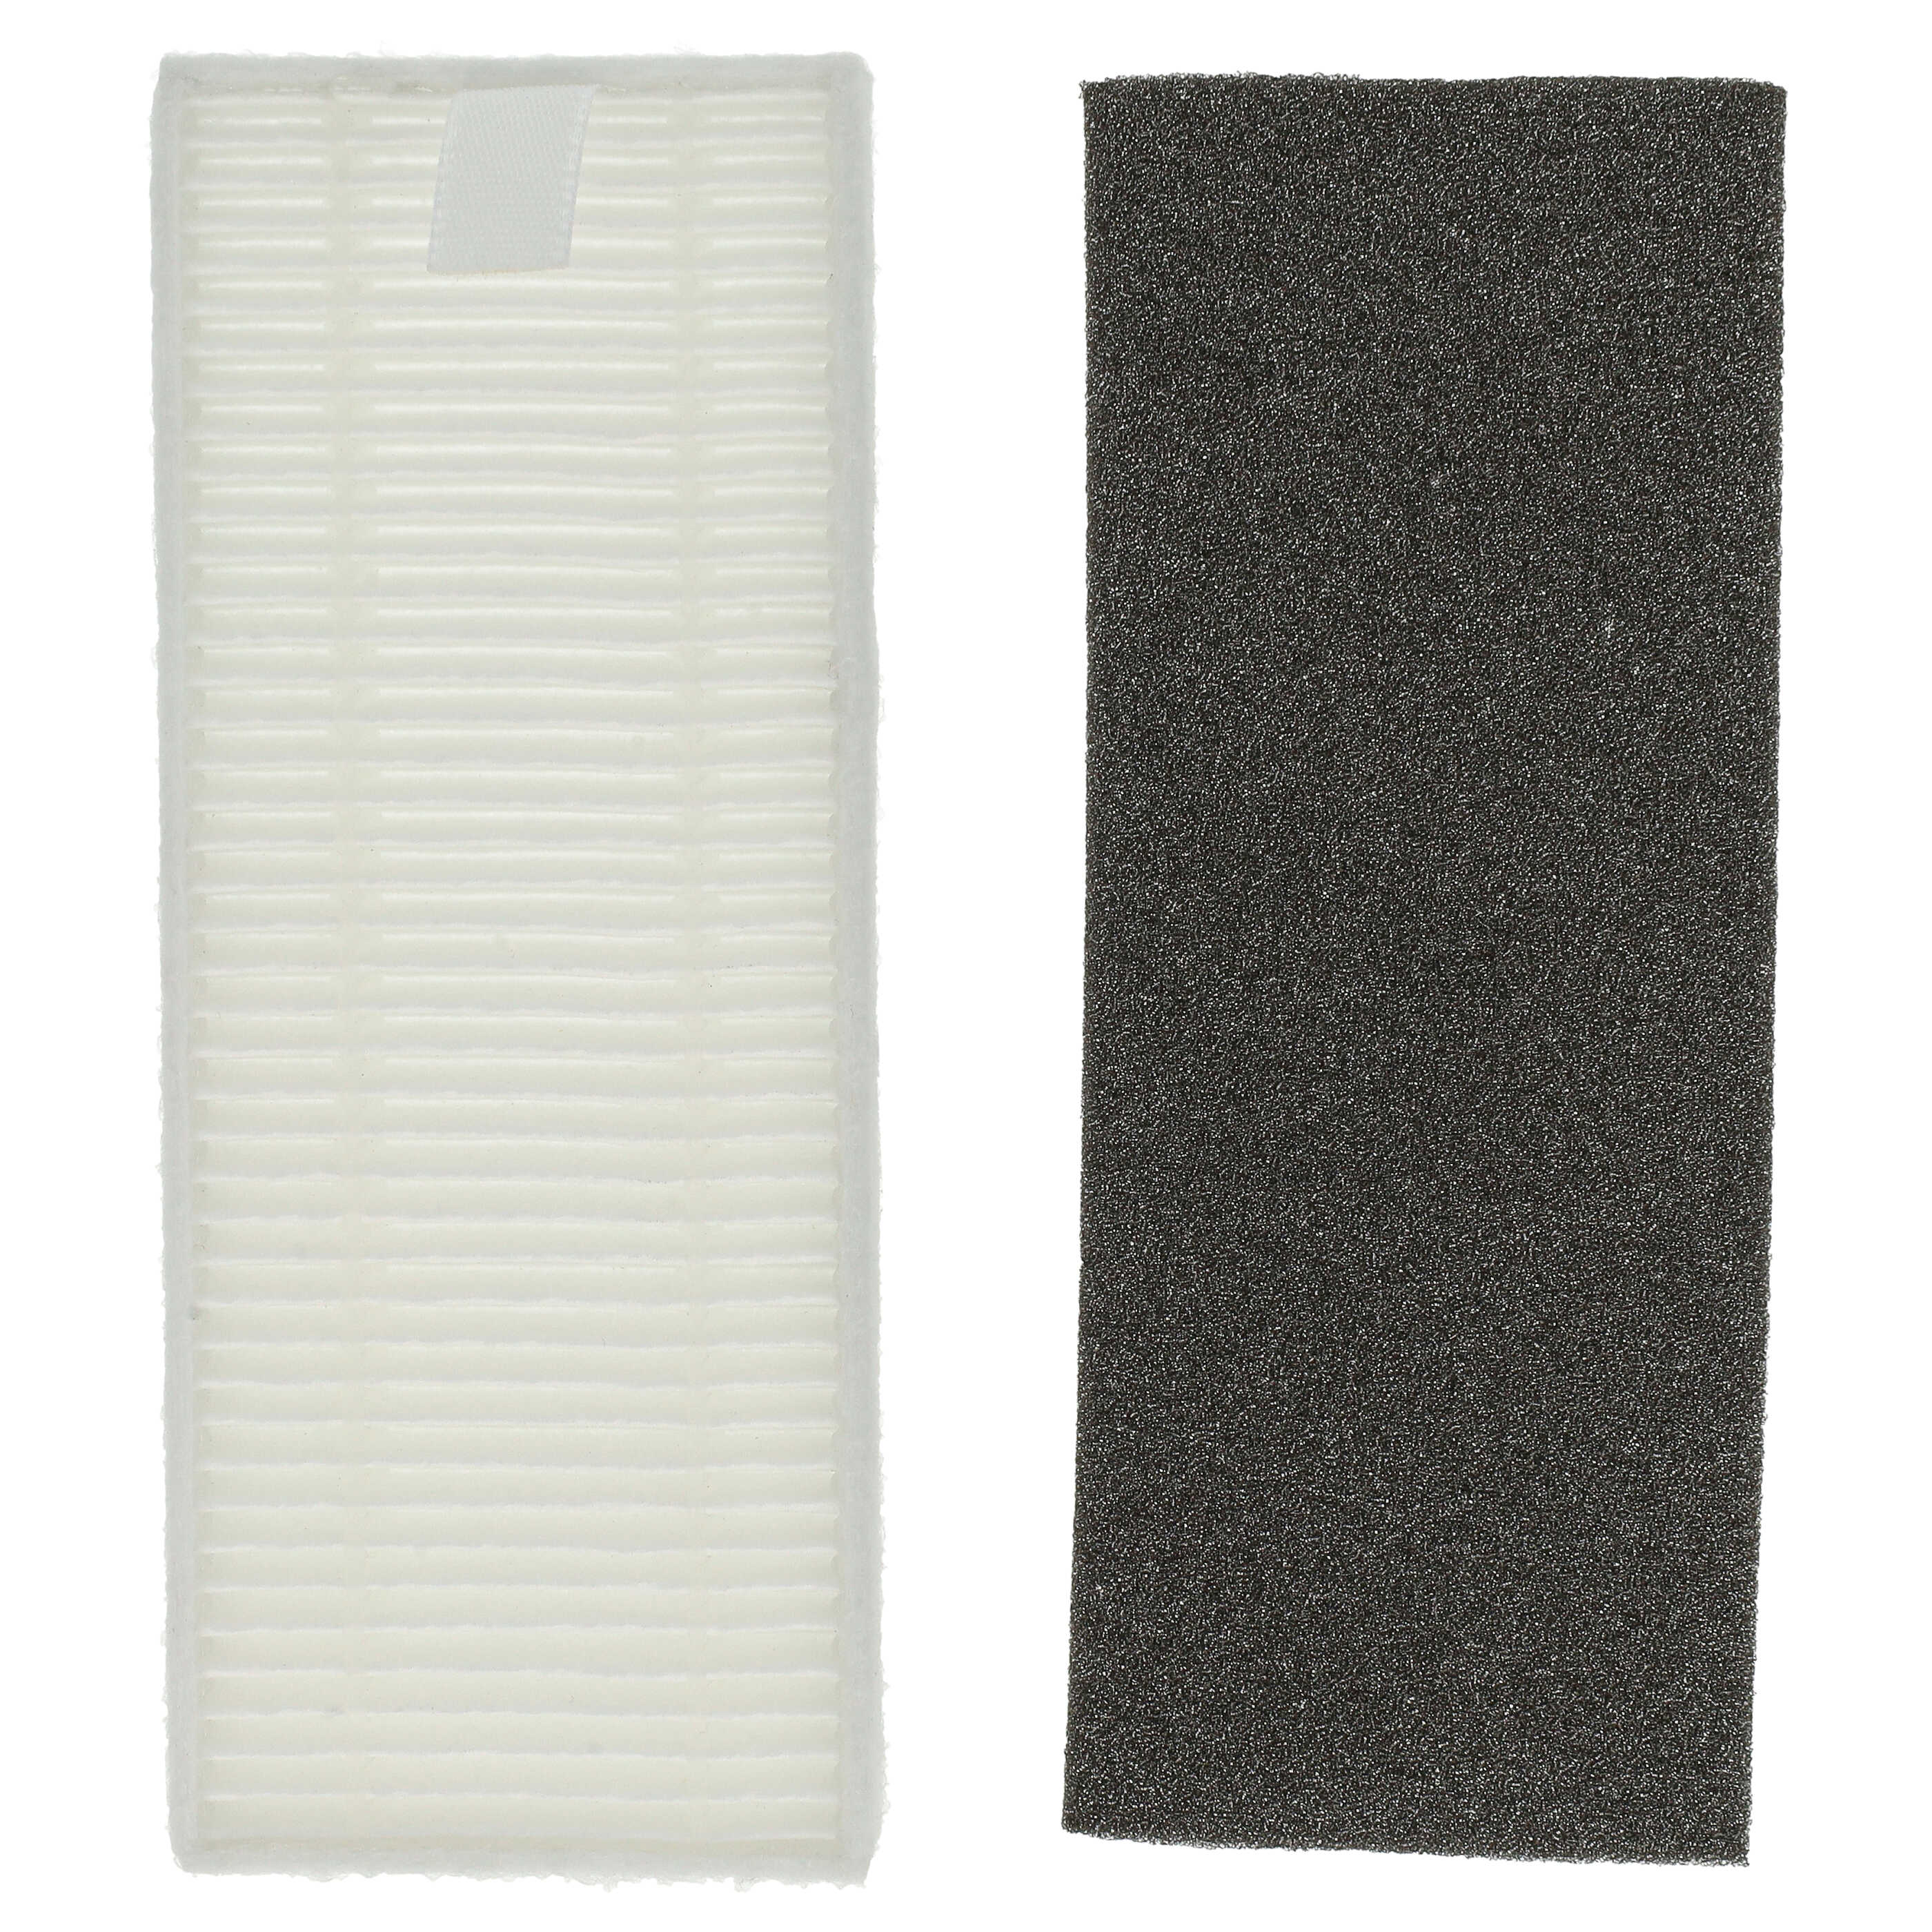 2x filter / foam filter replaces Rowenta ZR720002 for TefalVacuum Cleaner